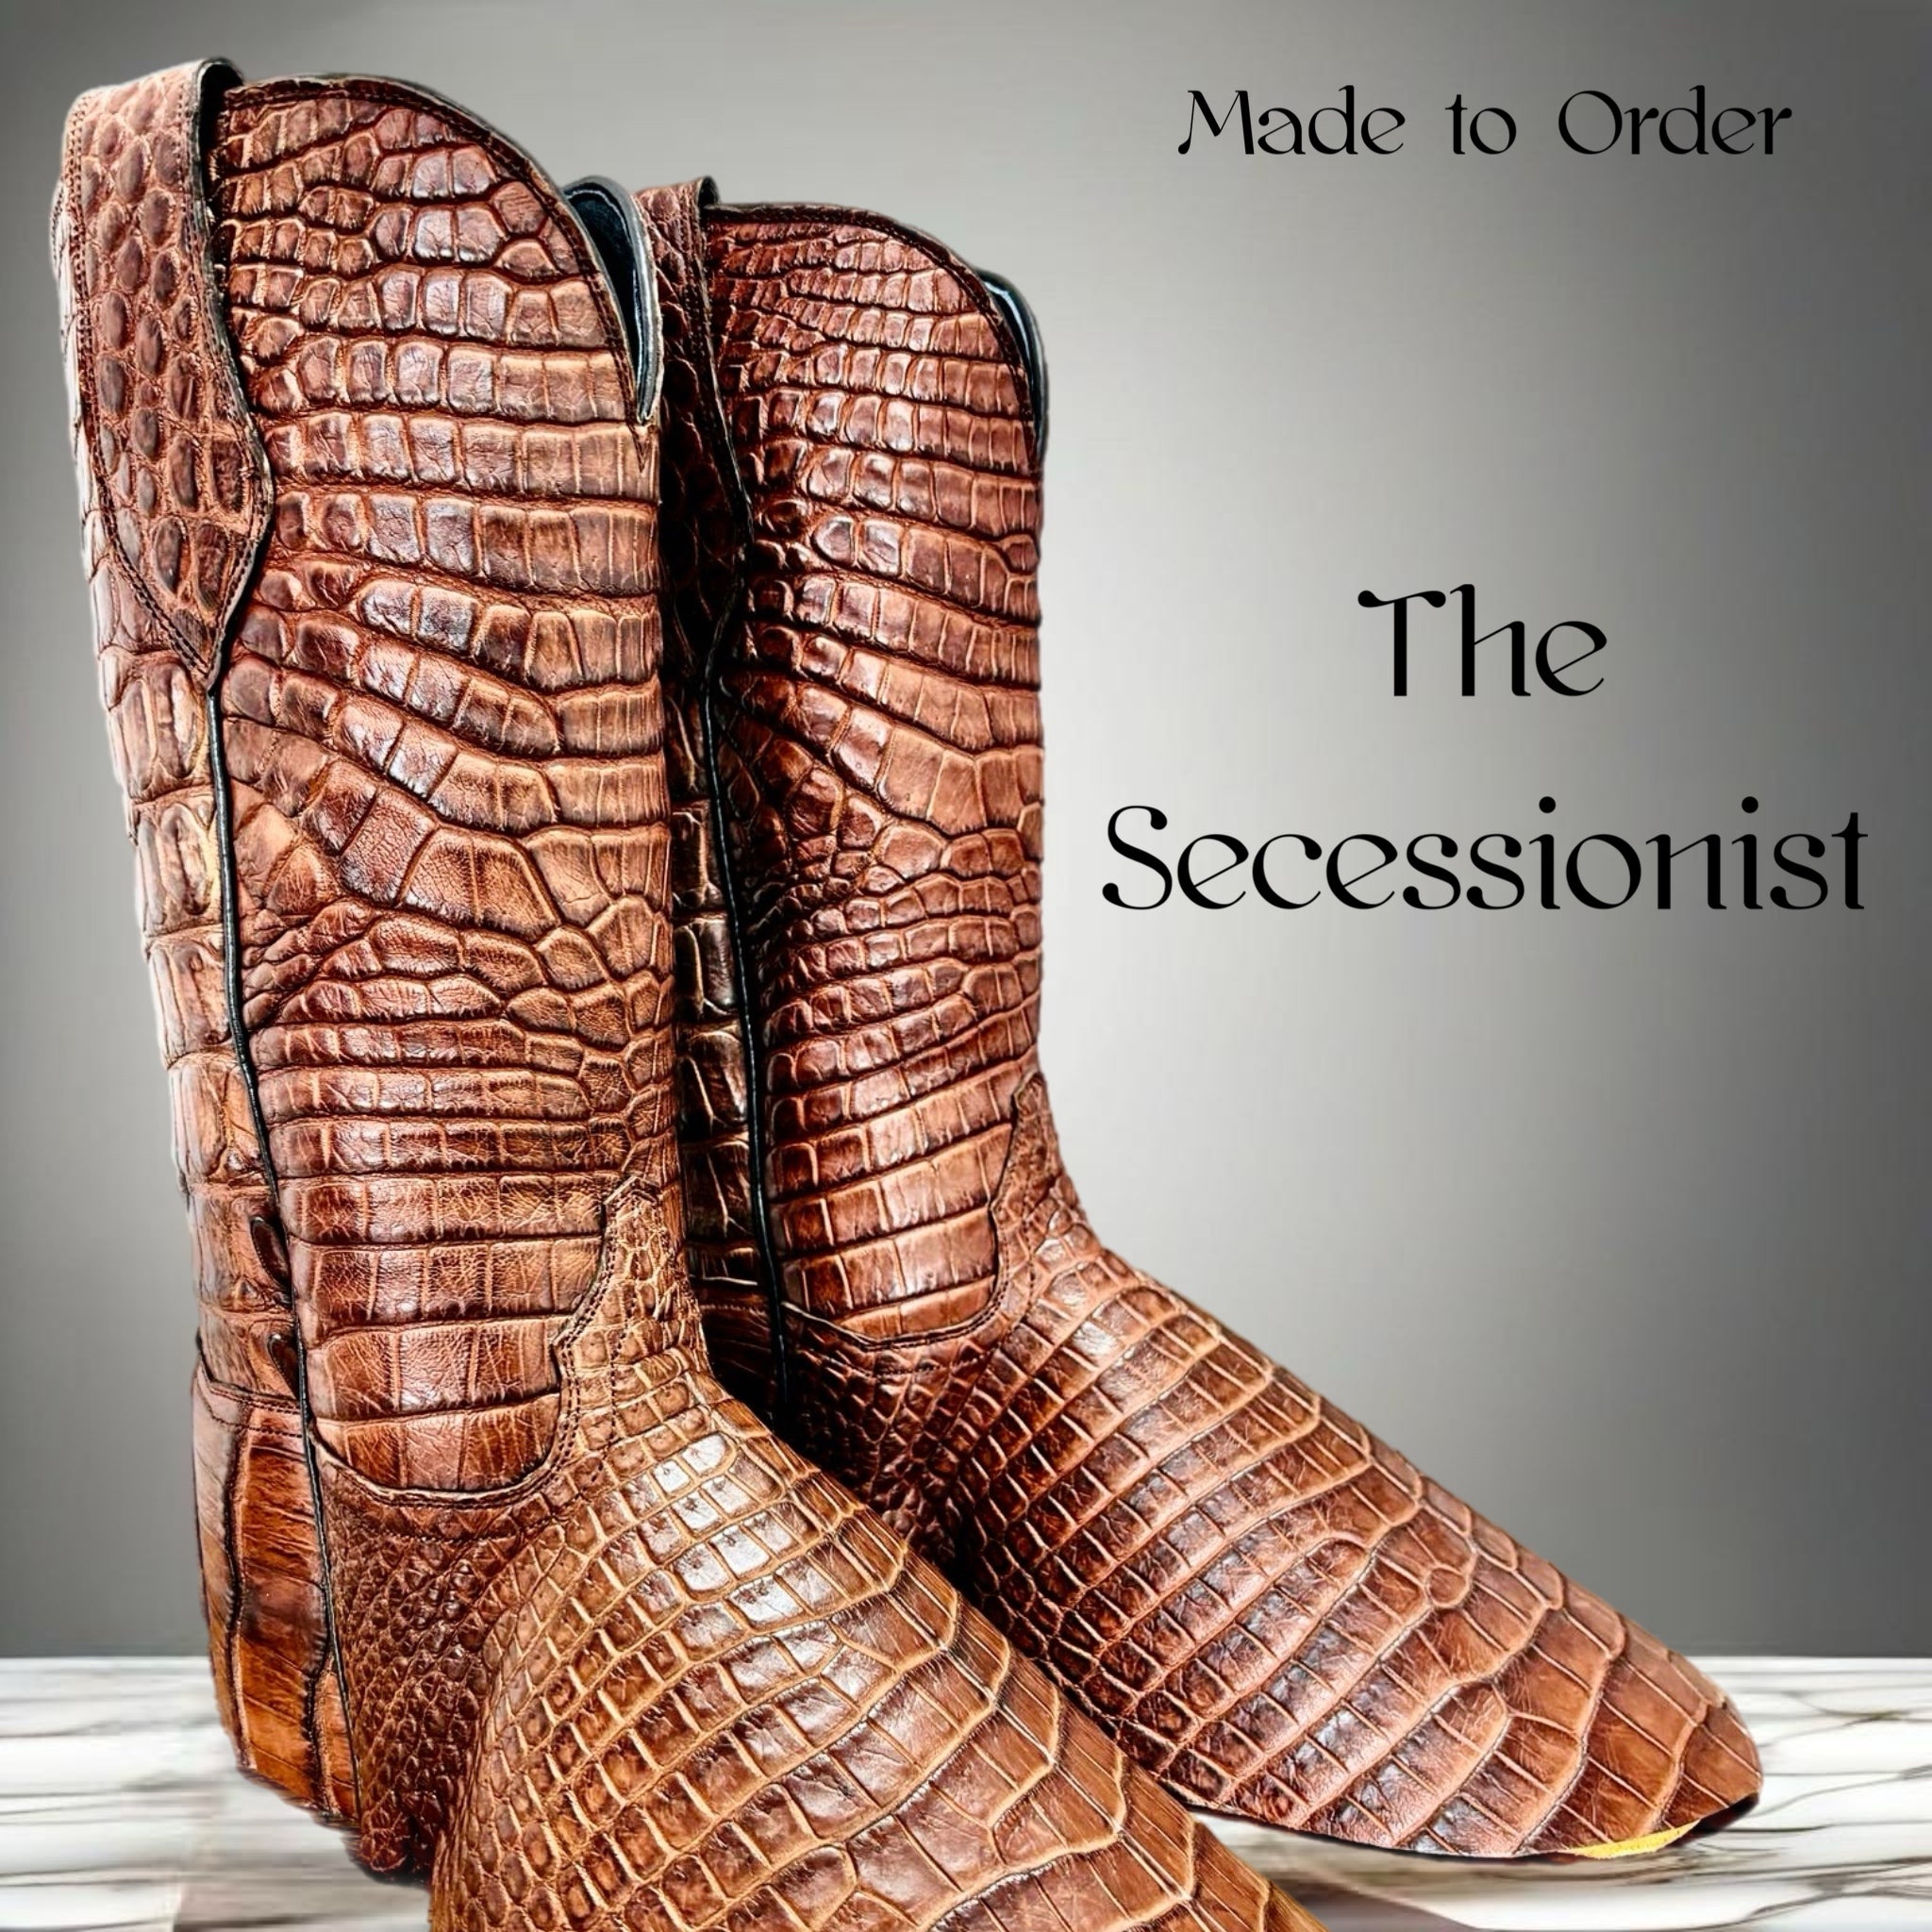 The Secessionist (Made to Order)